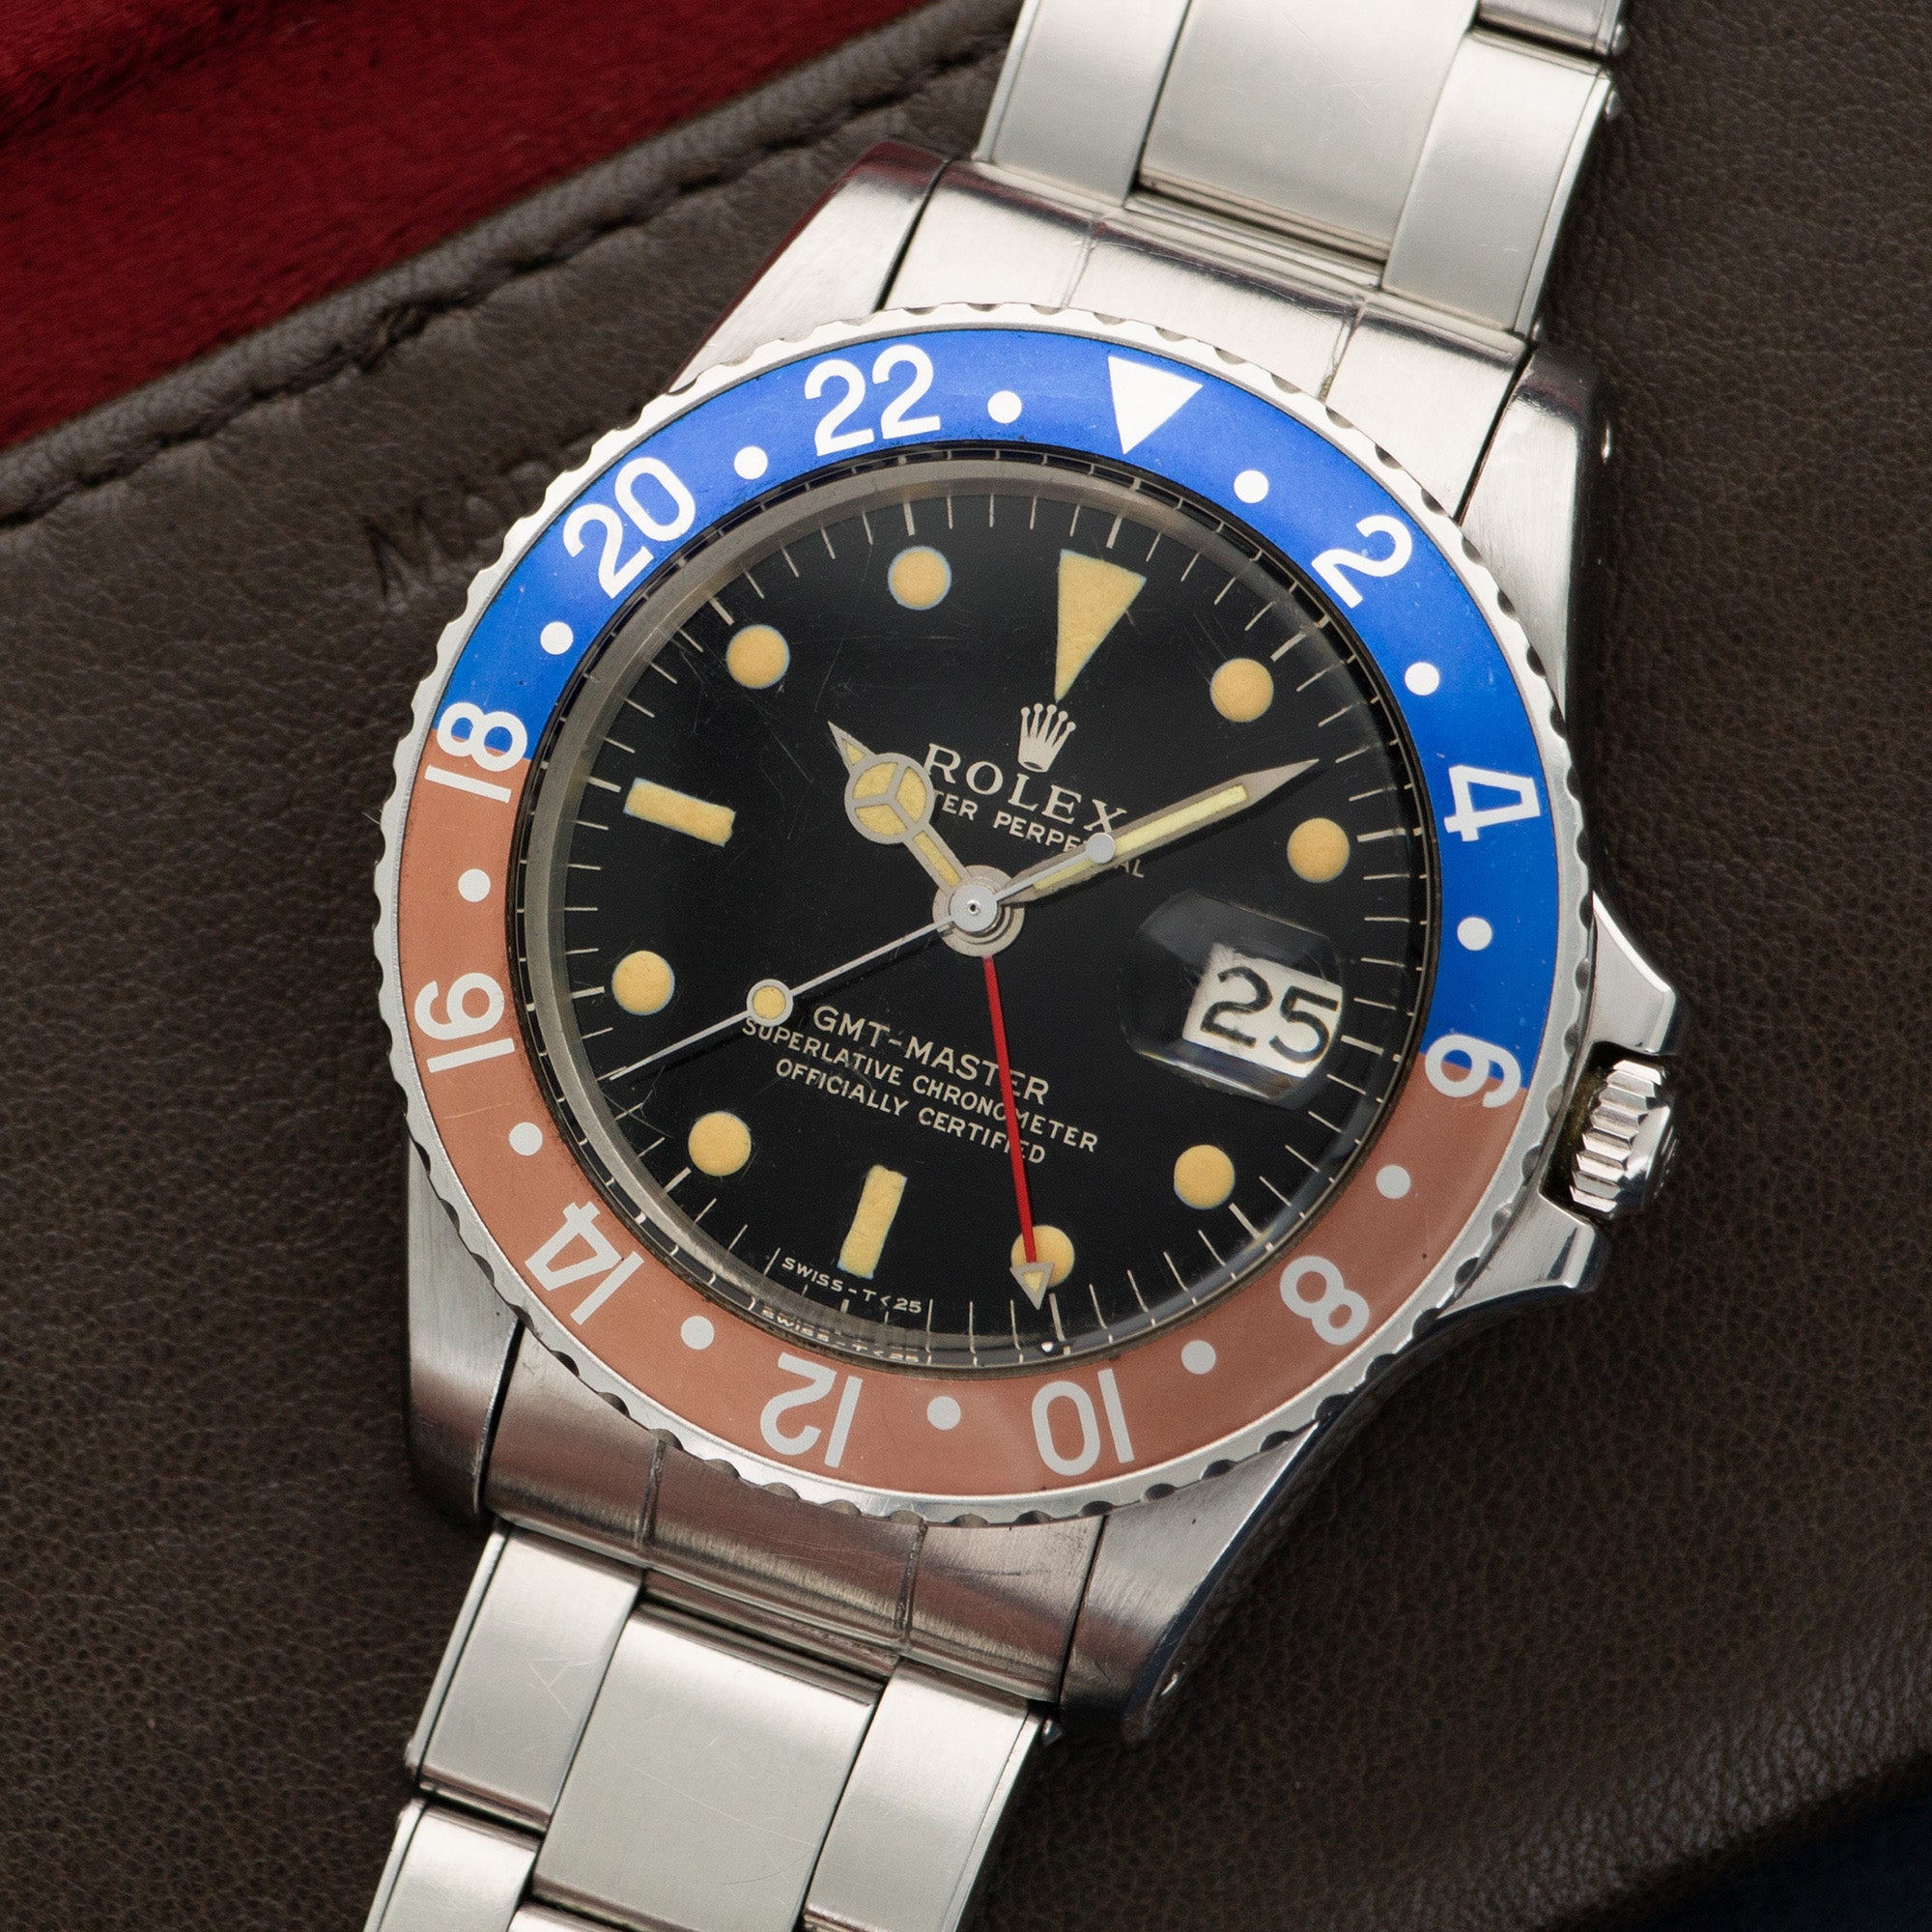 Rolex - Rolex GMT-Master Gilt Watch Ref. 1675 with Original Box and Papers - The Keystone Watches